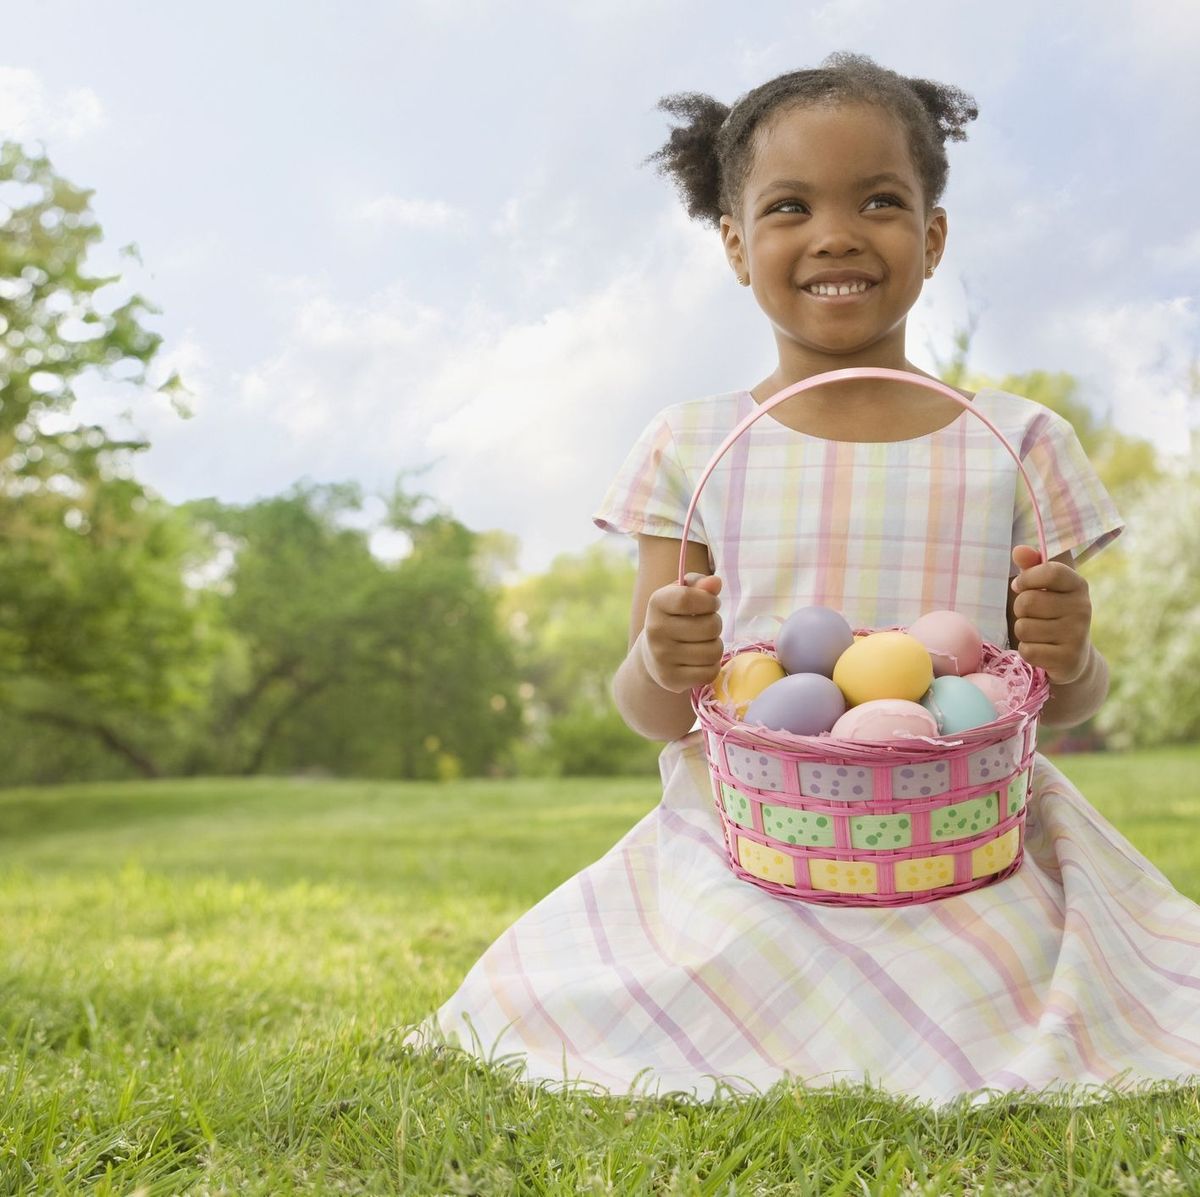 32 Great Easter Egg Hunt Ideas for Kids of All Ages